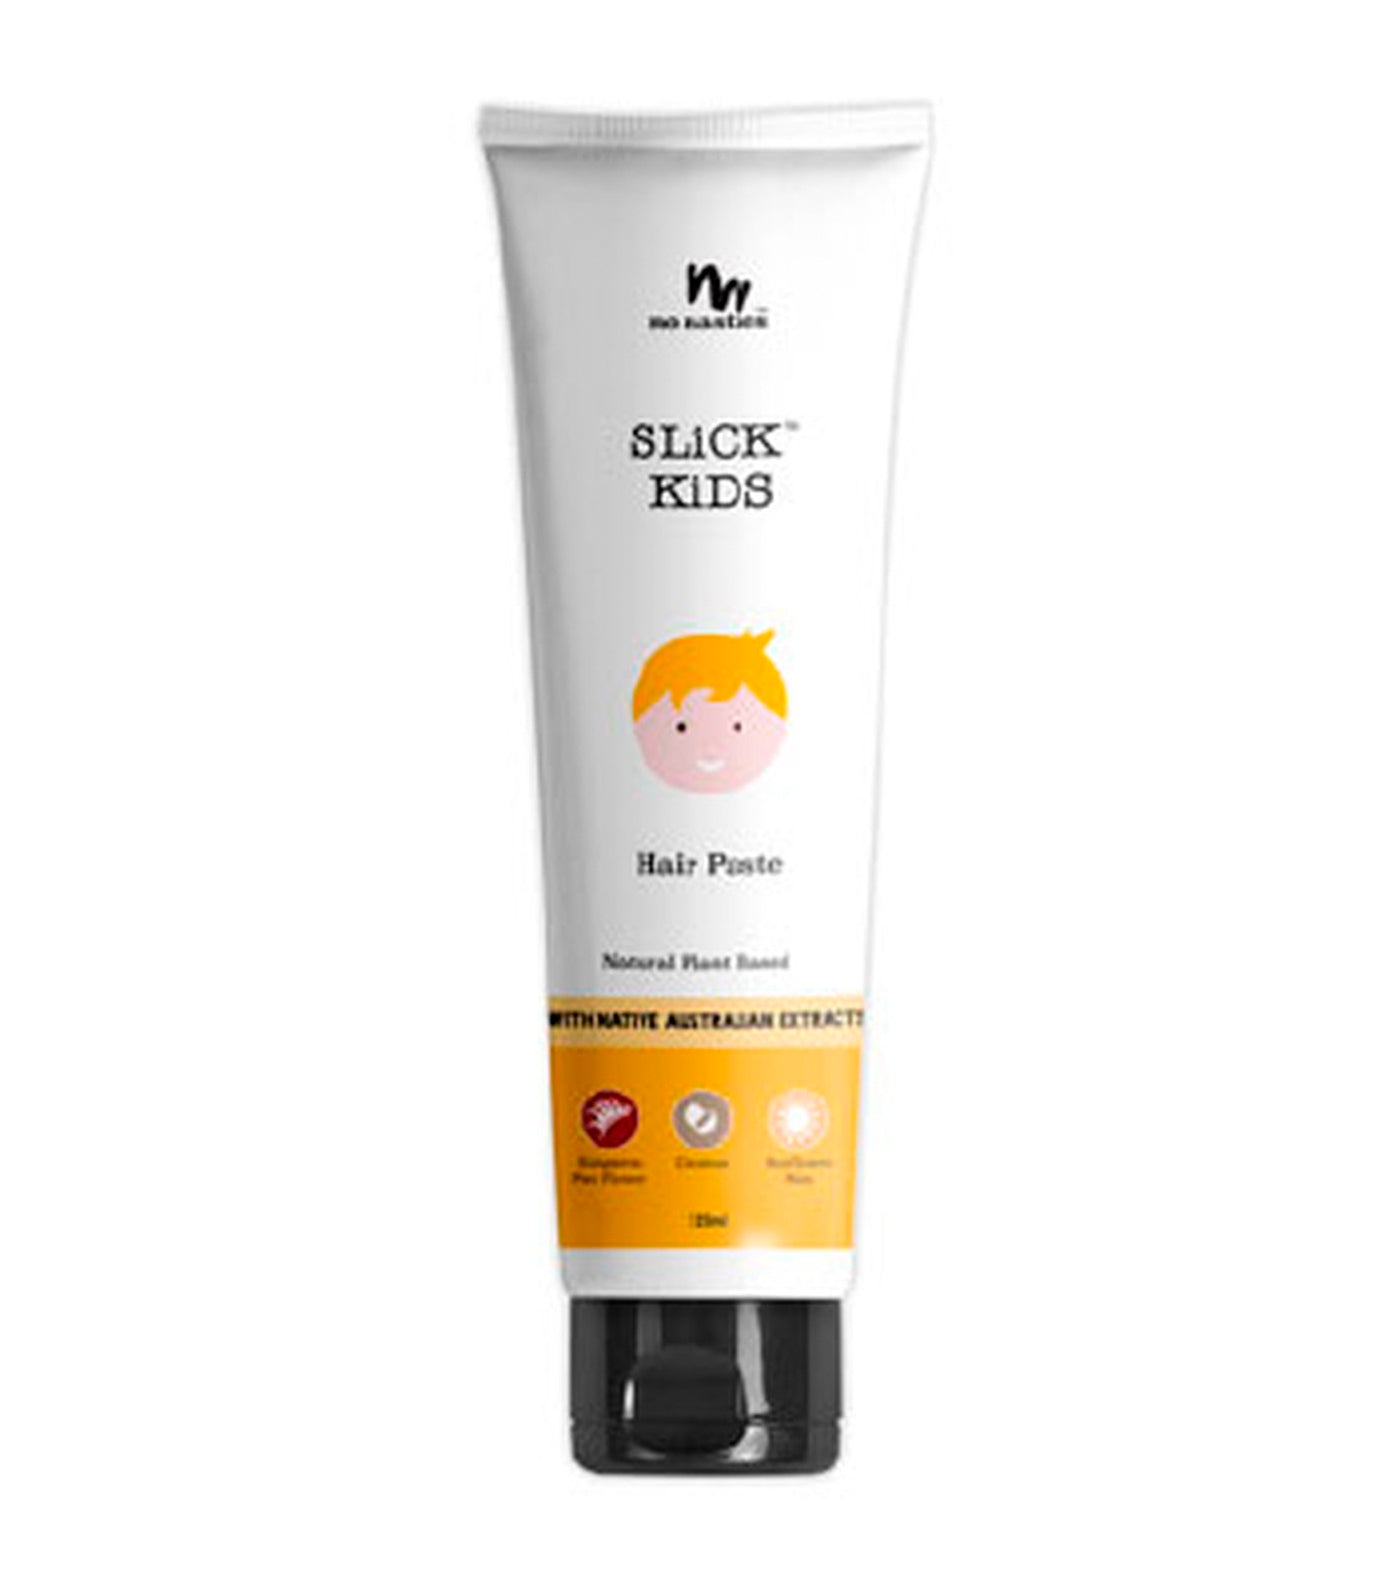 slick kids hair paste - fresh coconut and zesty lime